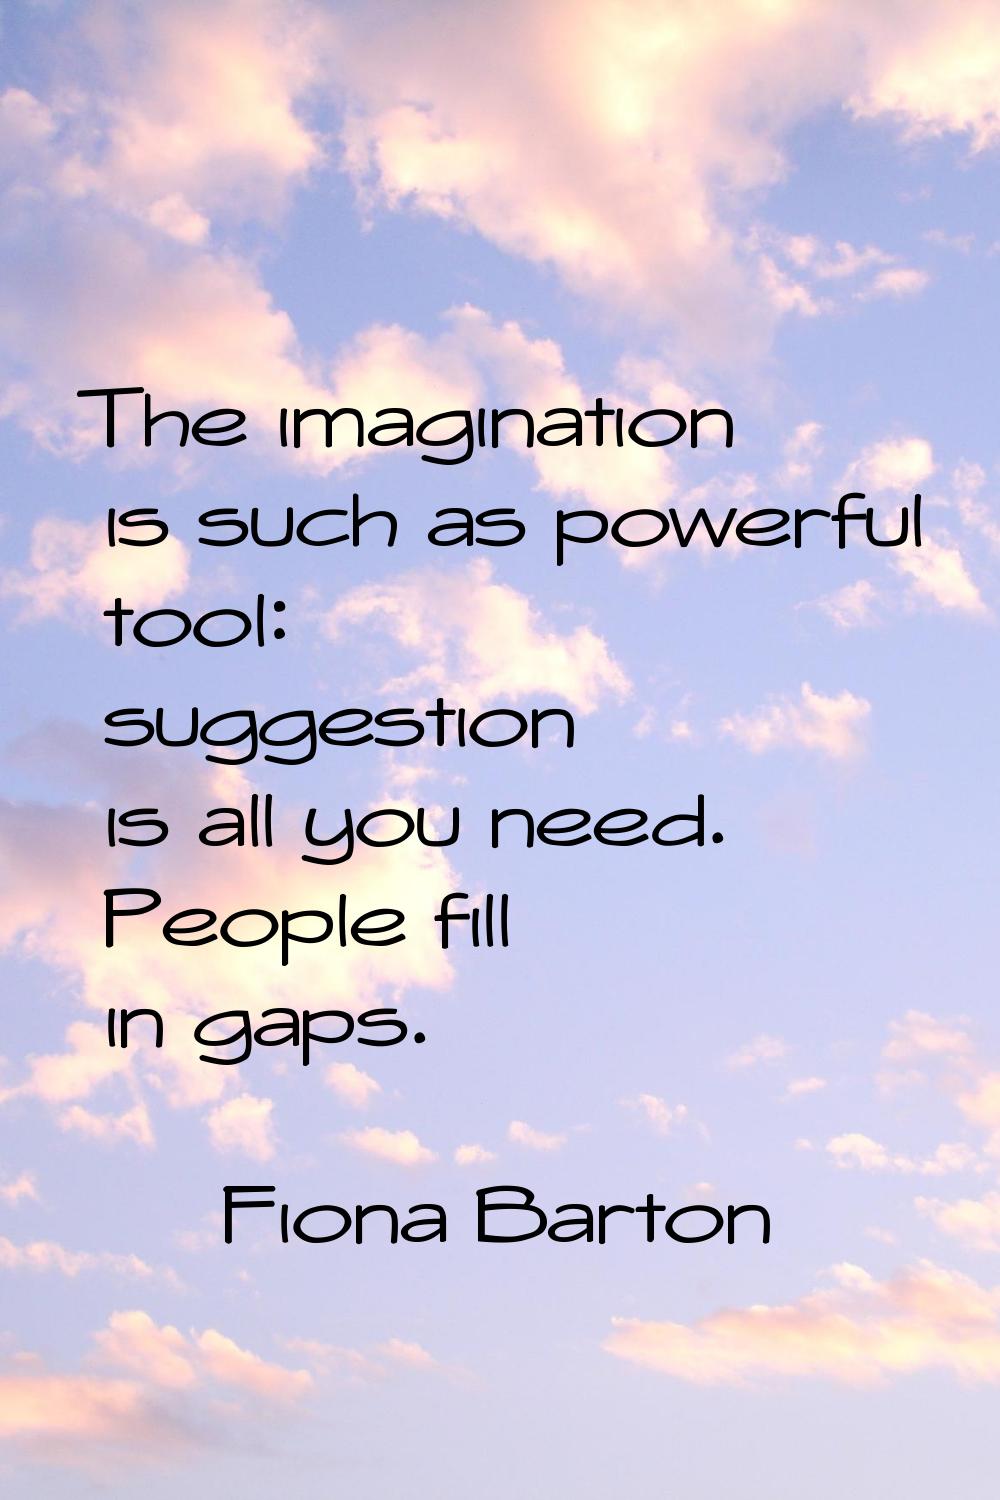 The imagination is such as powerful tool: suggestion is all you need. People fill in gaps.